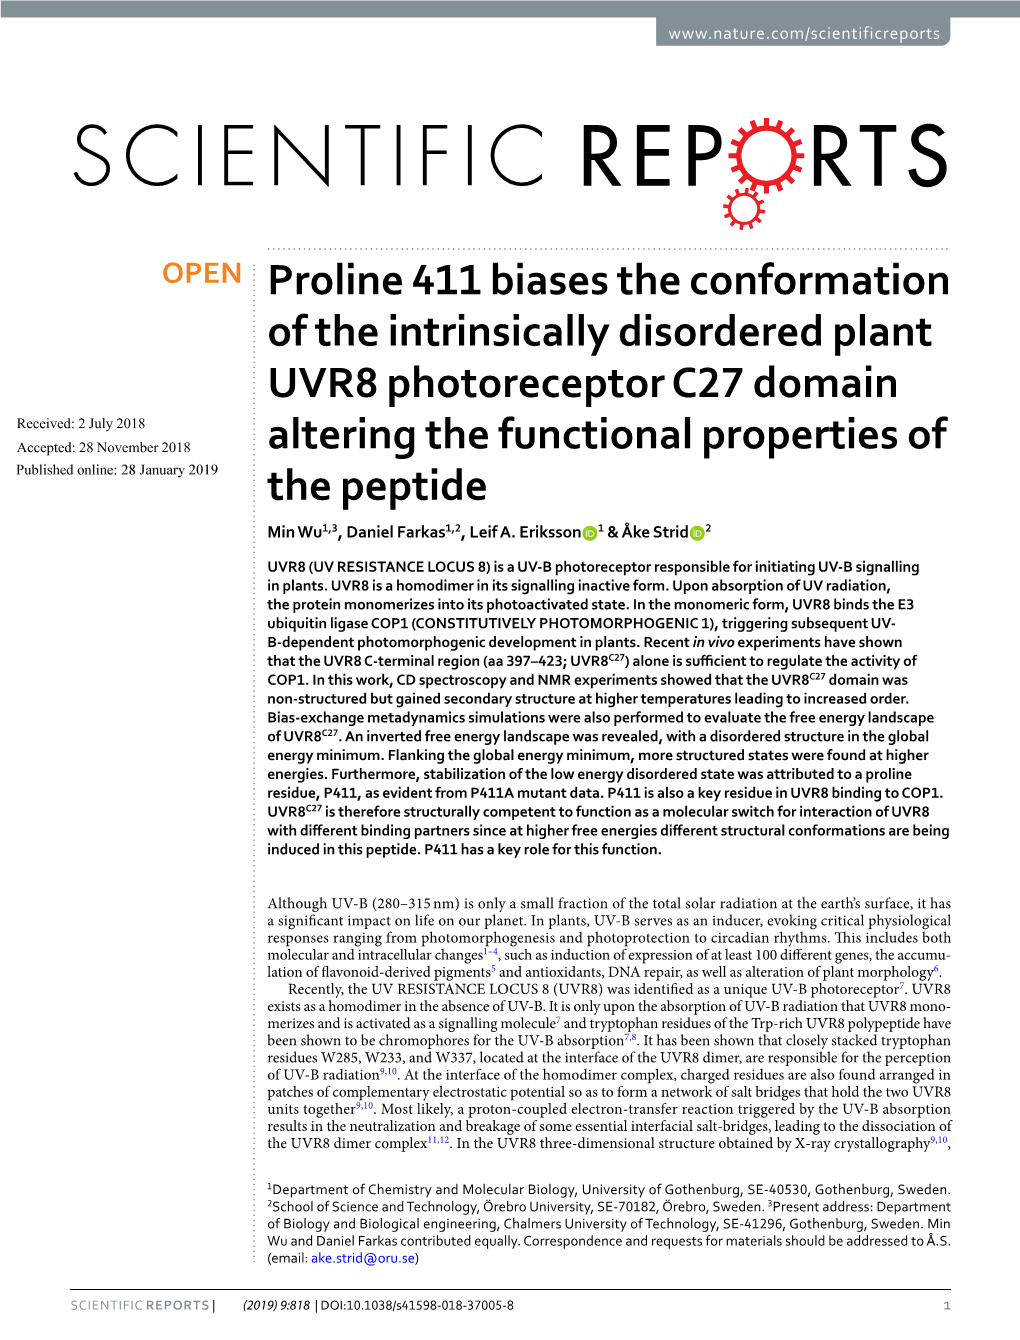 Proline 411 Biases the Conformation of the Intrinsically Disordered Plant